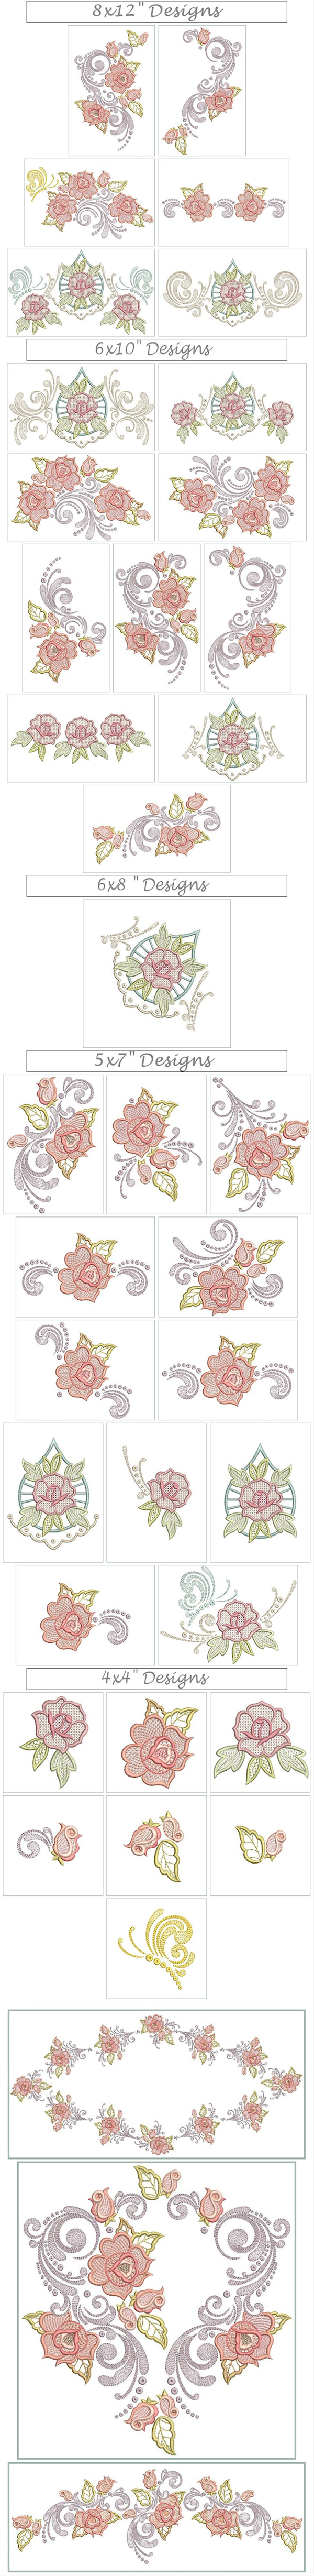 Rococo Inspirations Set 3 Vintage Roses-6